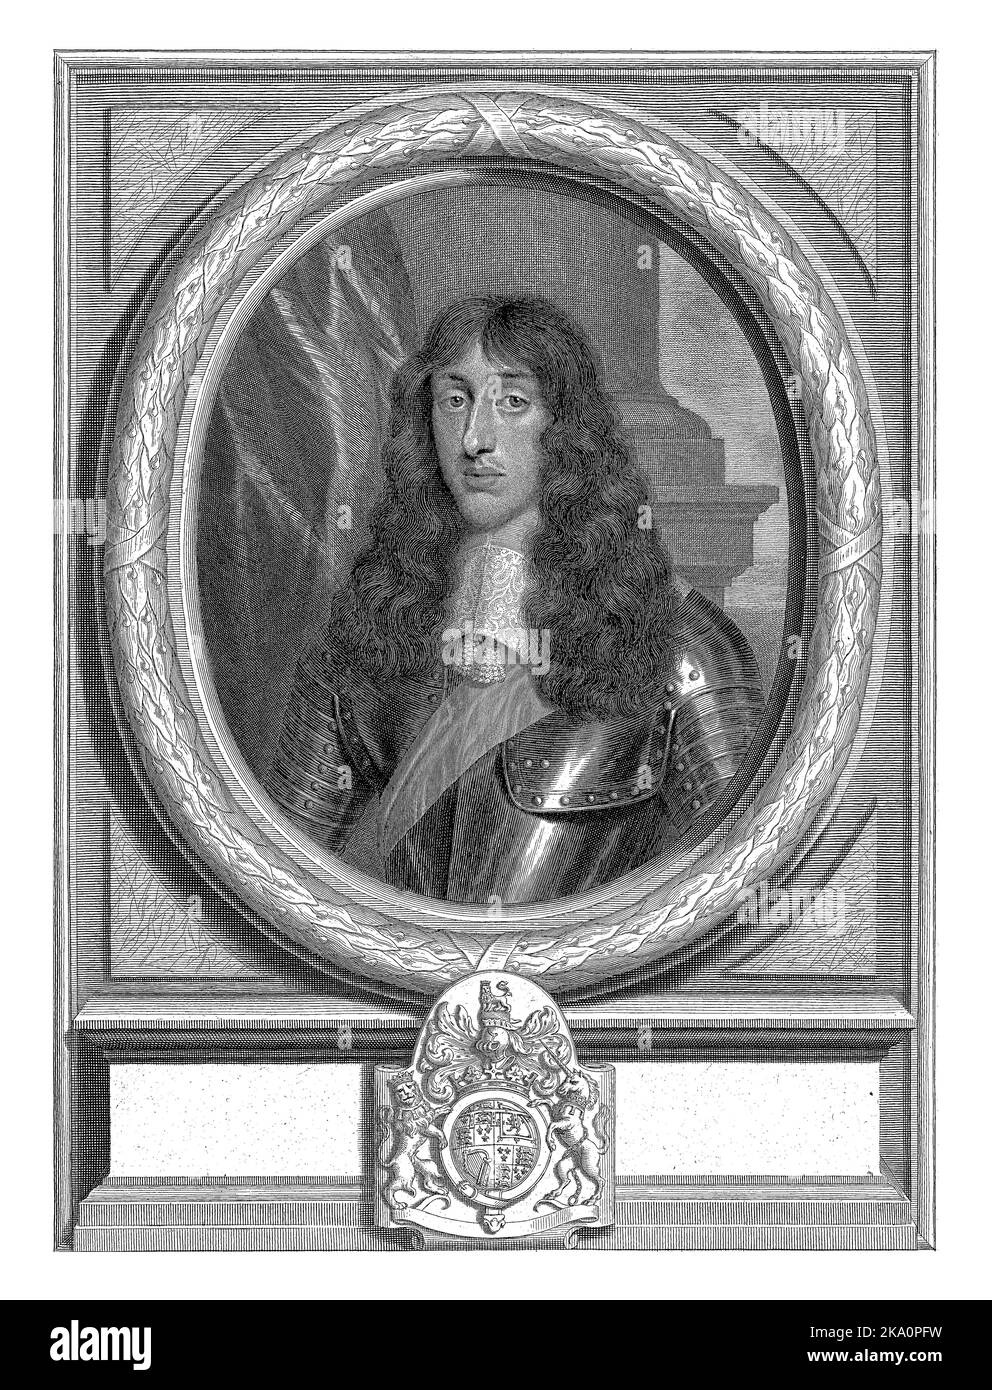 Portrait of Henry Stuart, Duke of Gloucester, bust-piece clad in armor in oval frame with laurel wreath. Base with coat of arms and Latin inscription. Stock Photo